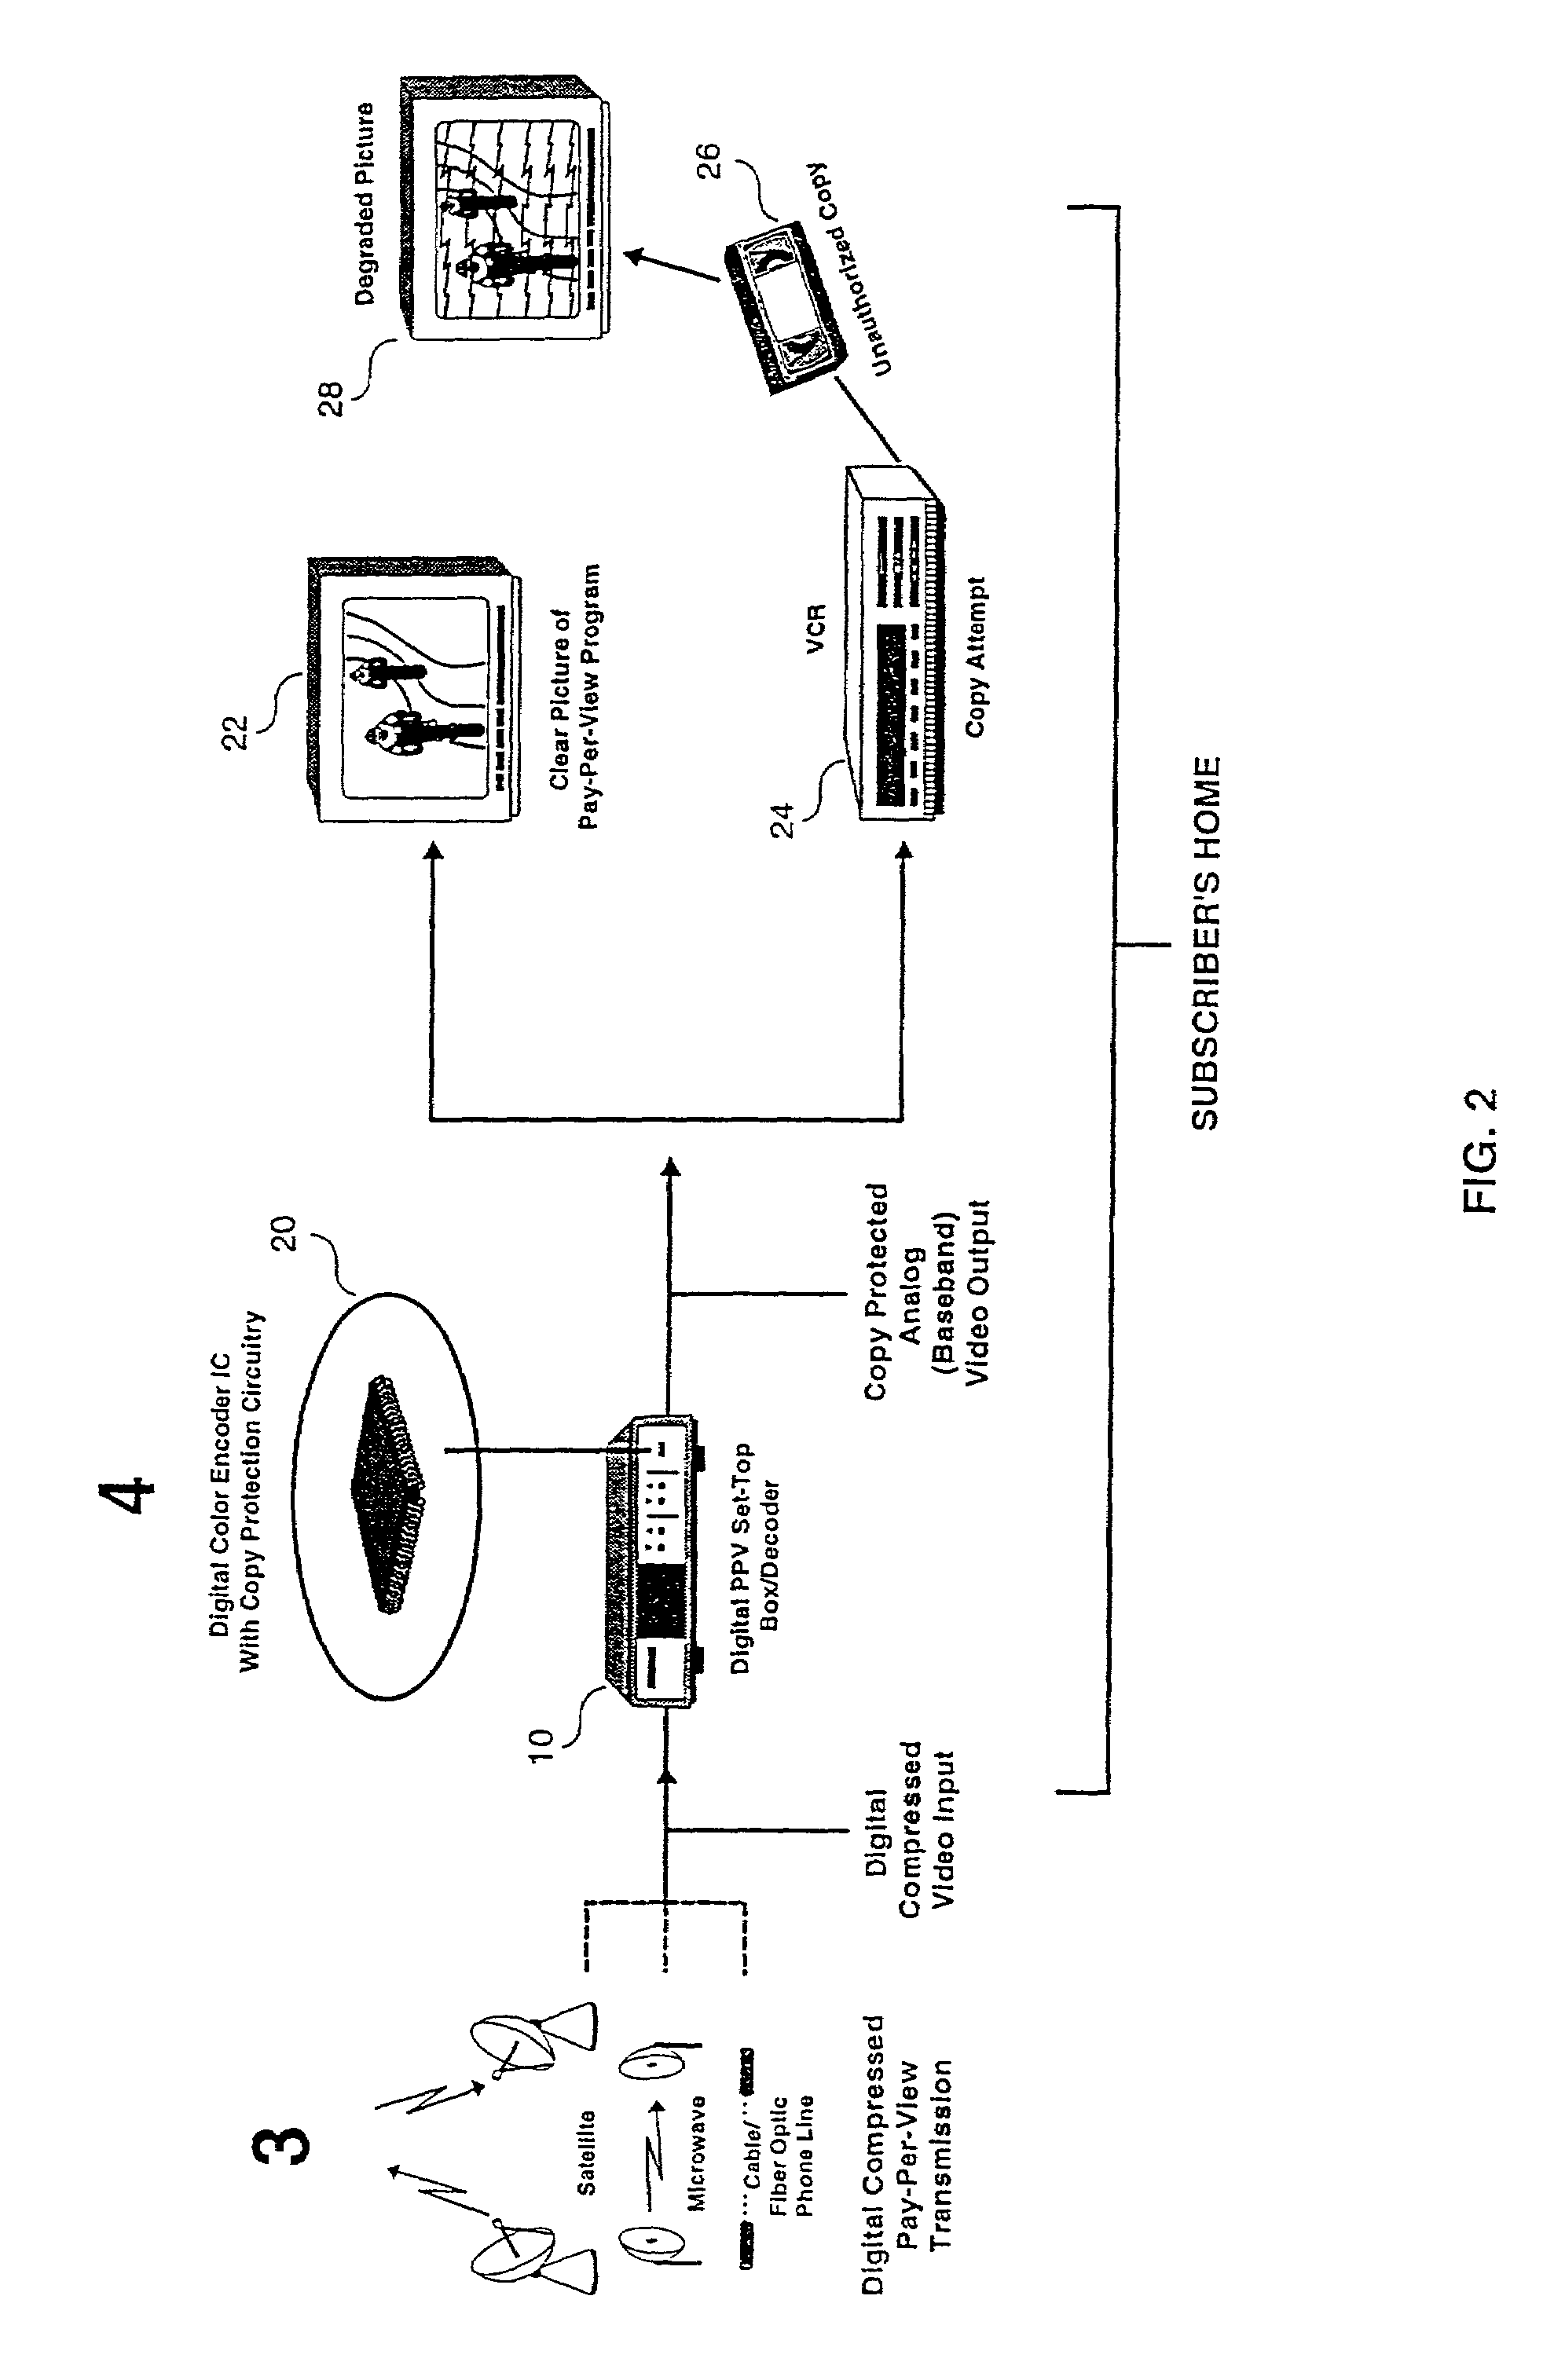 Method and apparatus for providing copy protection using a transmittal mode command